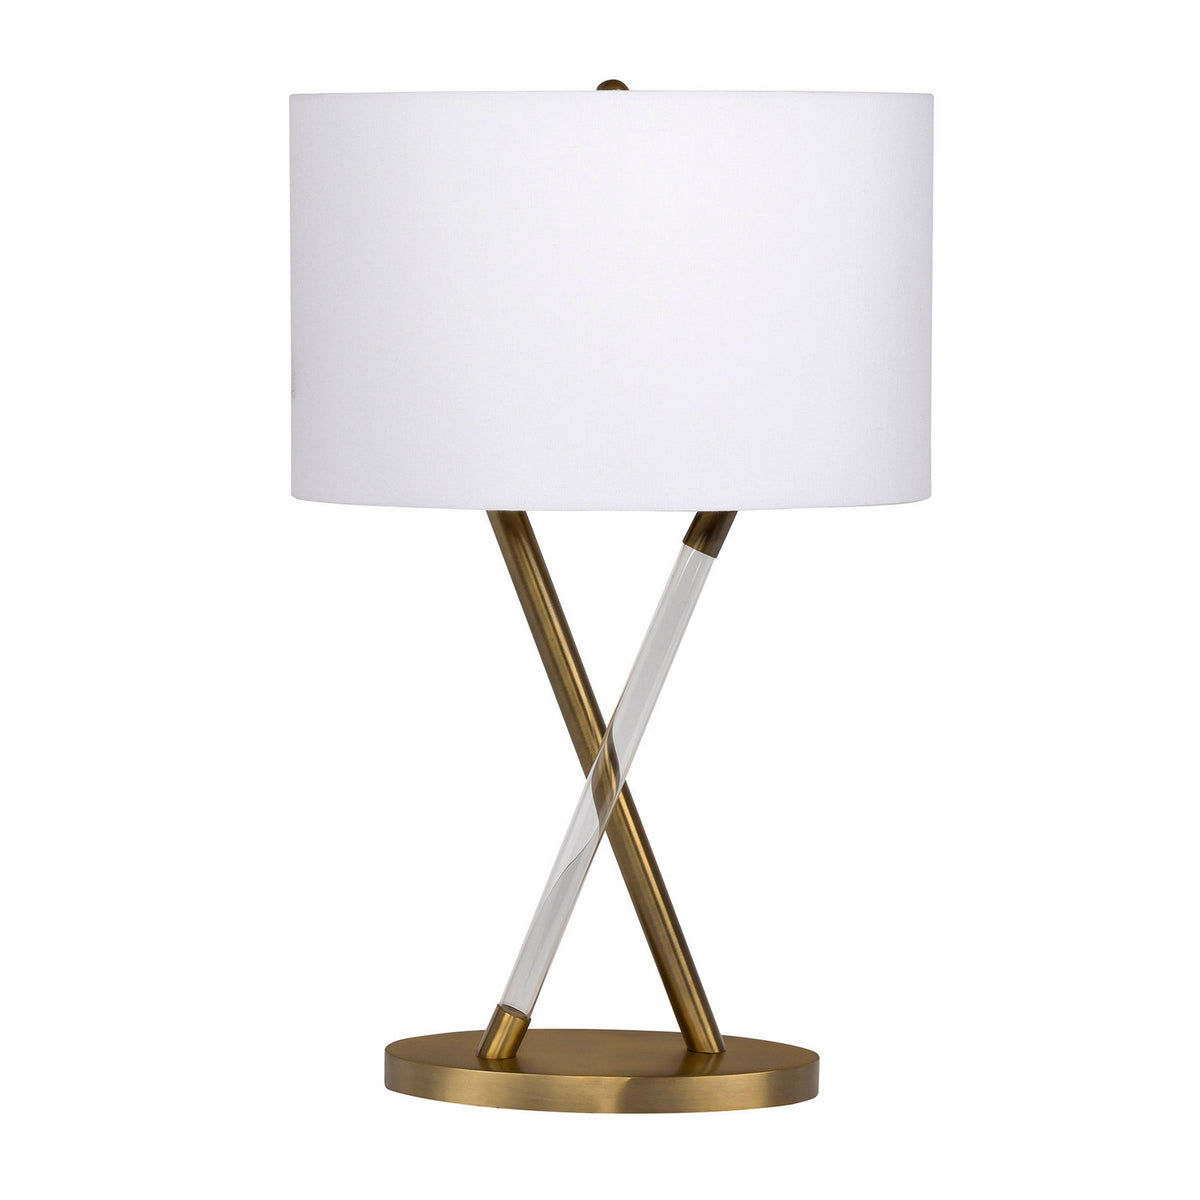 Craftmade - 86224 - One Light Table Lamp - Table Lamp - Natural Brass